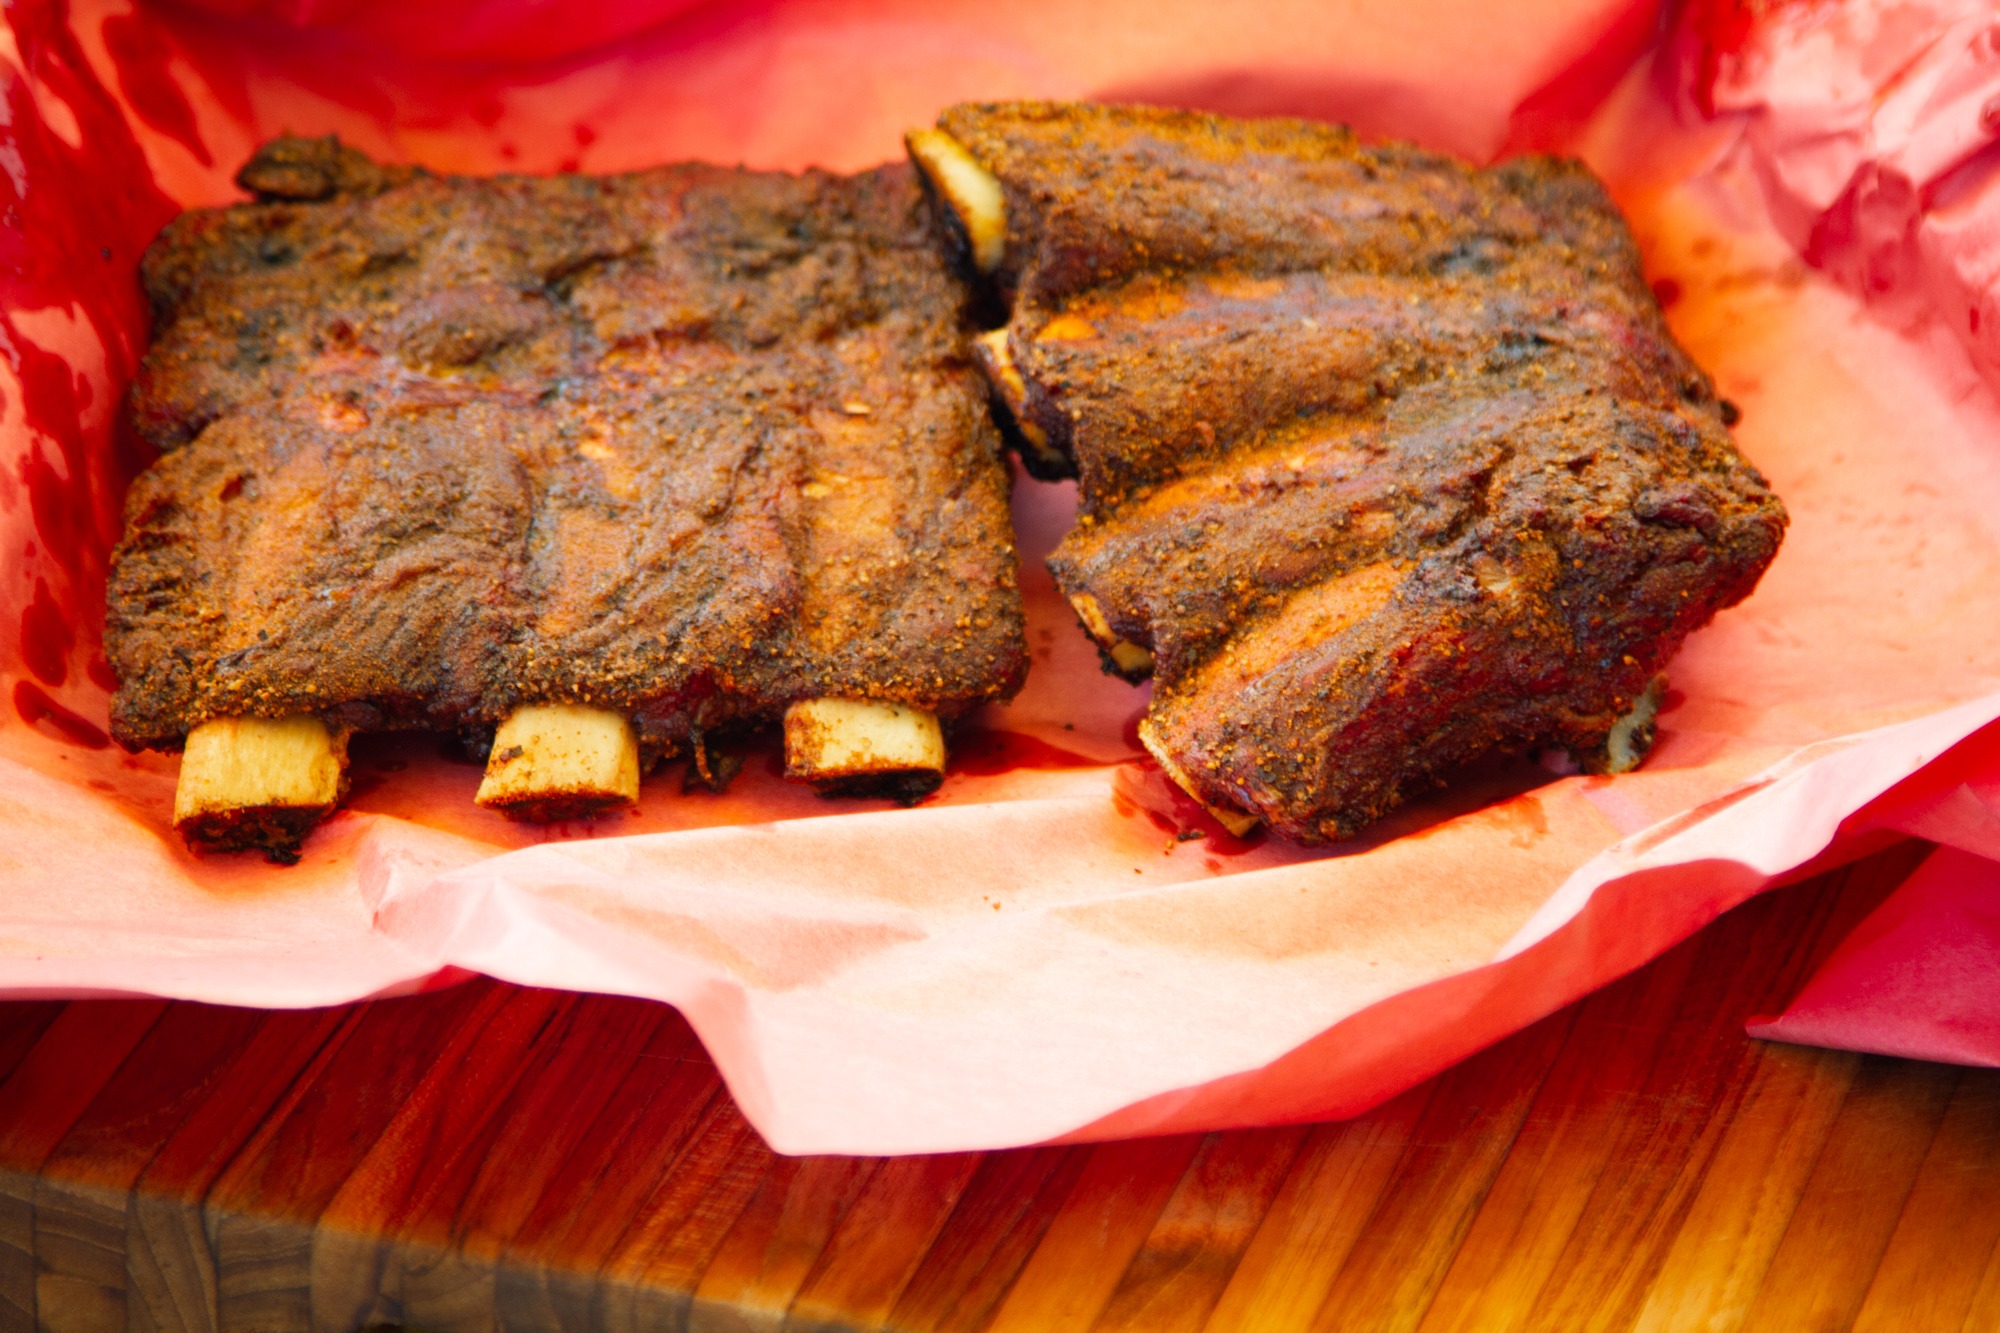 https://blog.thermoworks.com/wp-content/uploads/2019/06/Beef-Ribs-IMG_484655-of-80.jpg